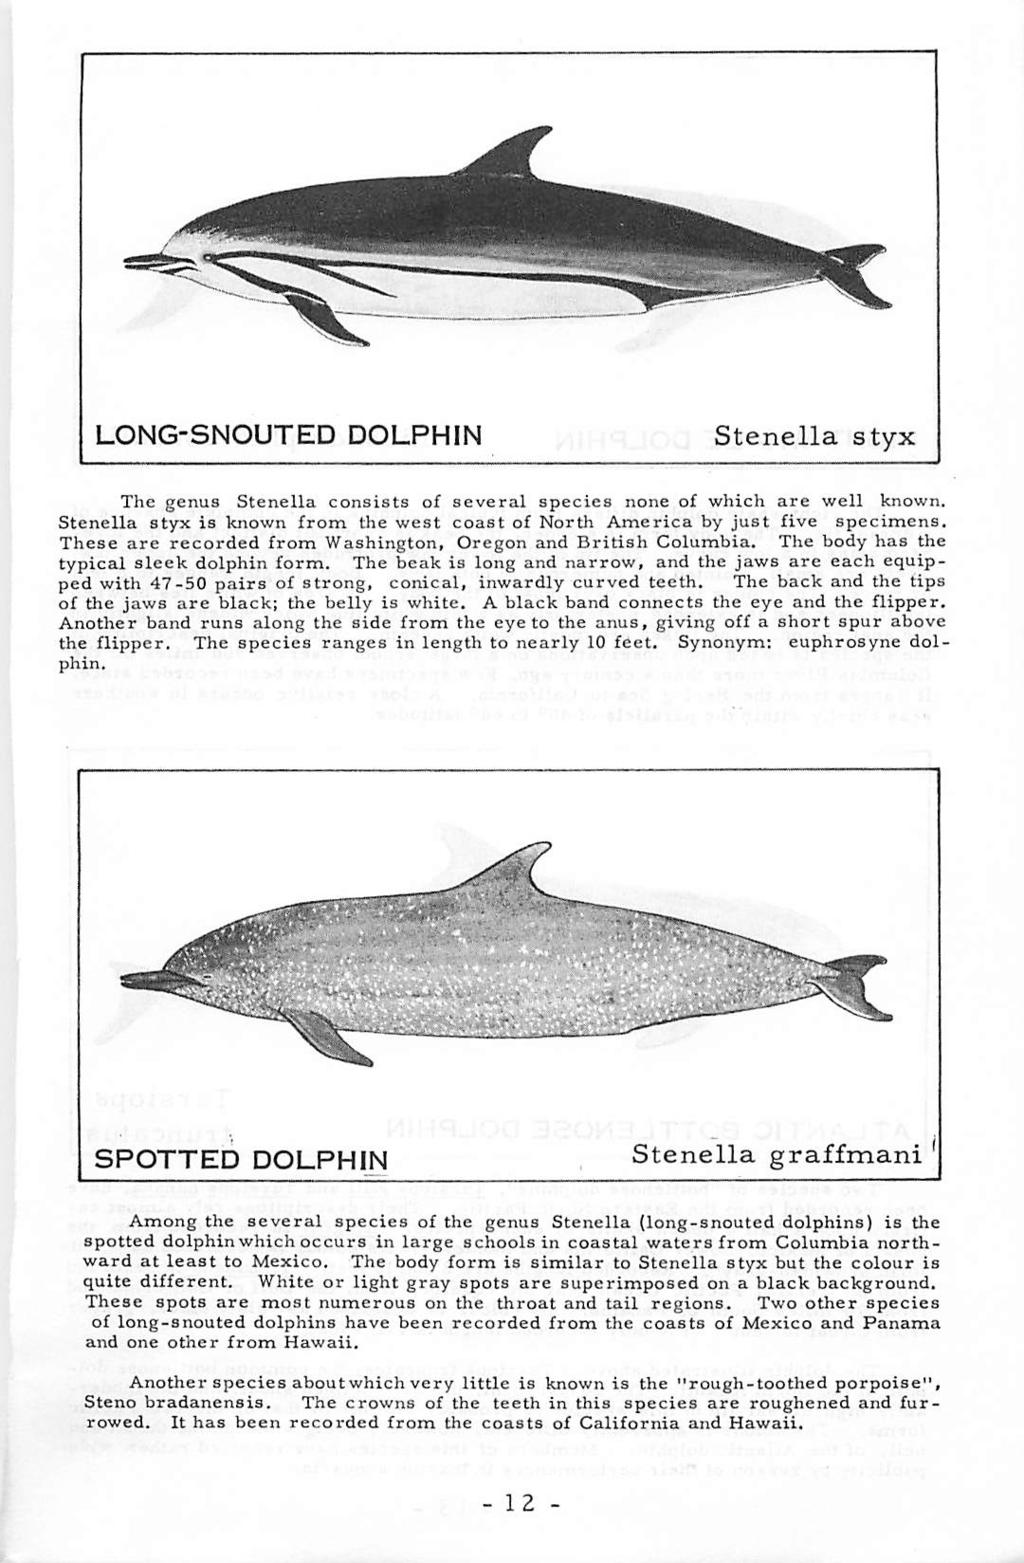 LONG-SNOUTED DOLPHIN Stenella styx The genus Stenella consists of several species none of which are well known. Stenella styx is known from the west coast of North America by just five specimens.